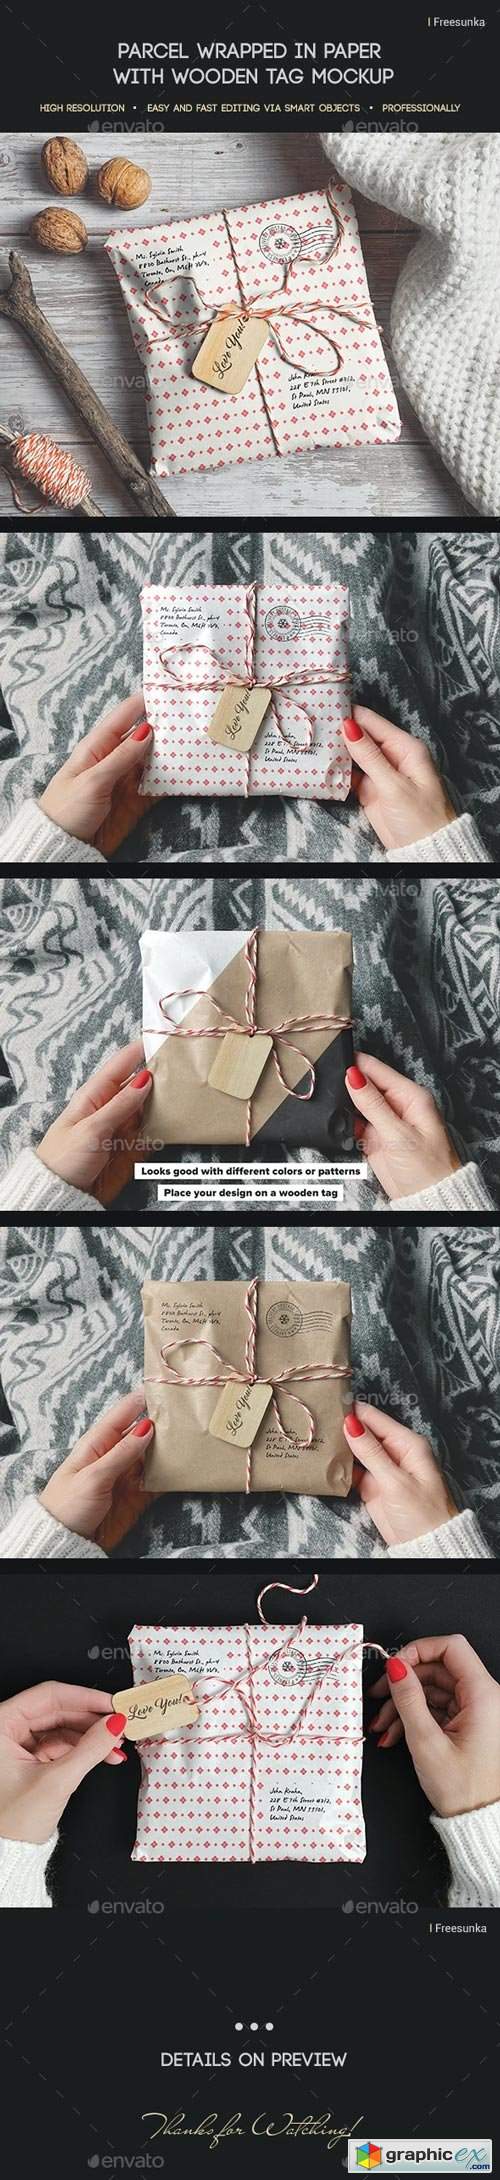 Parcel Wrapped In Paper With Wooden Tag Mockup 